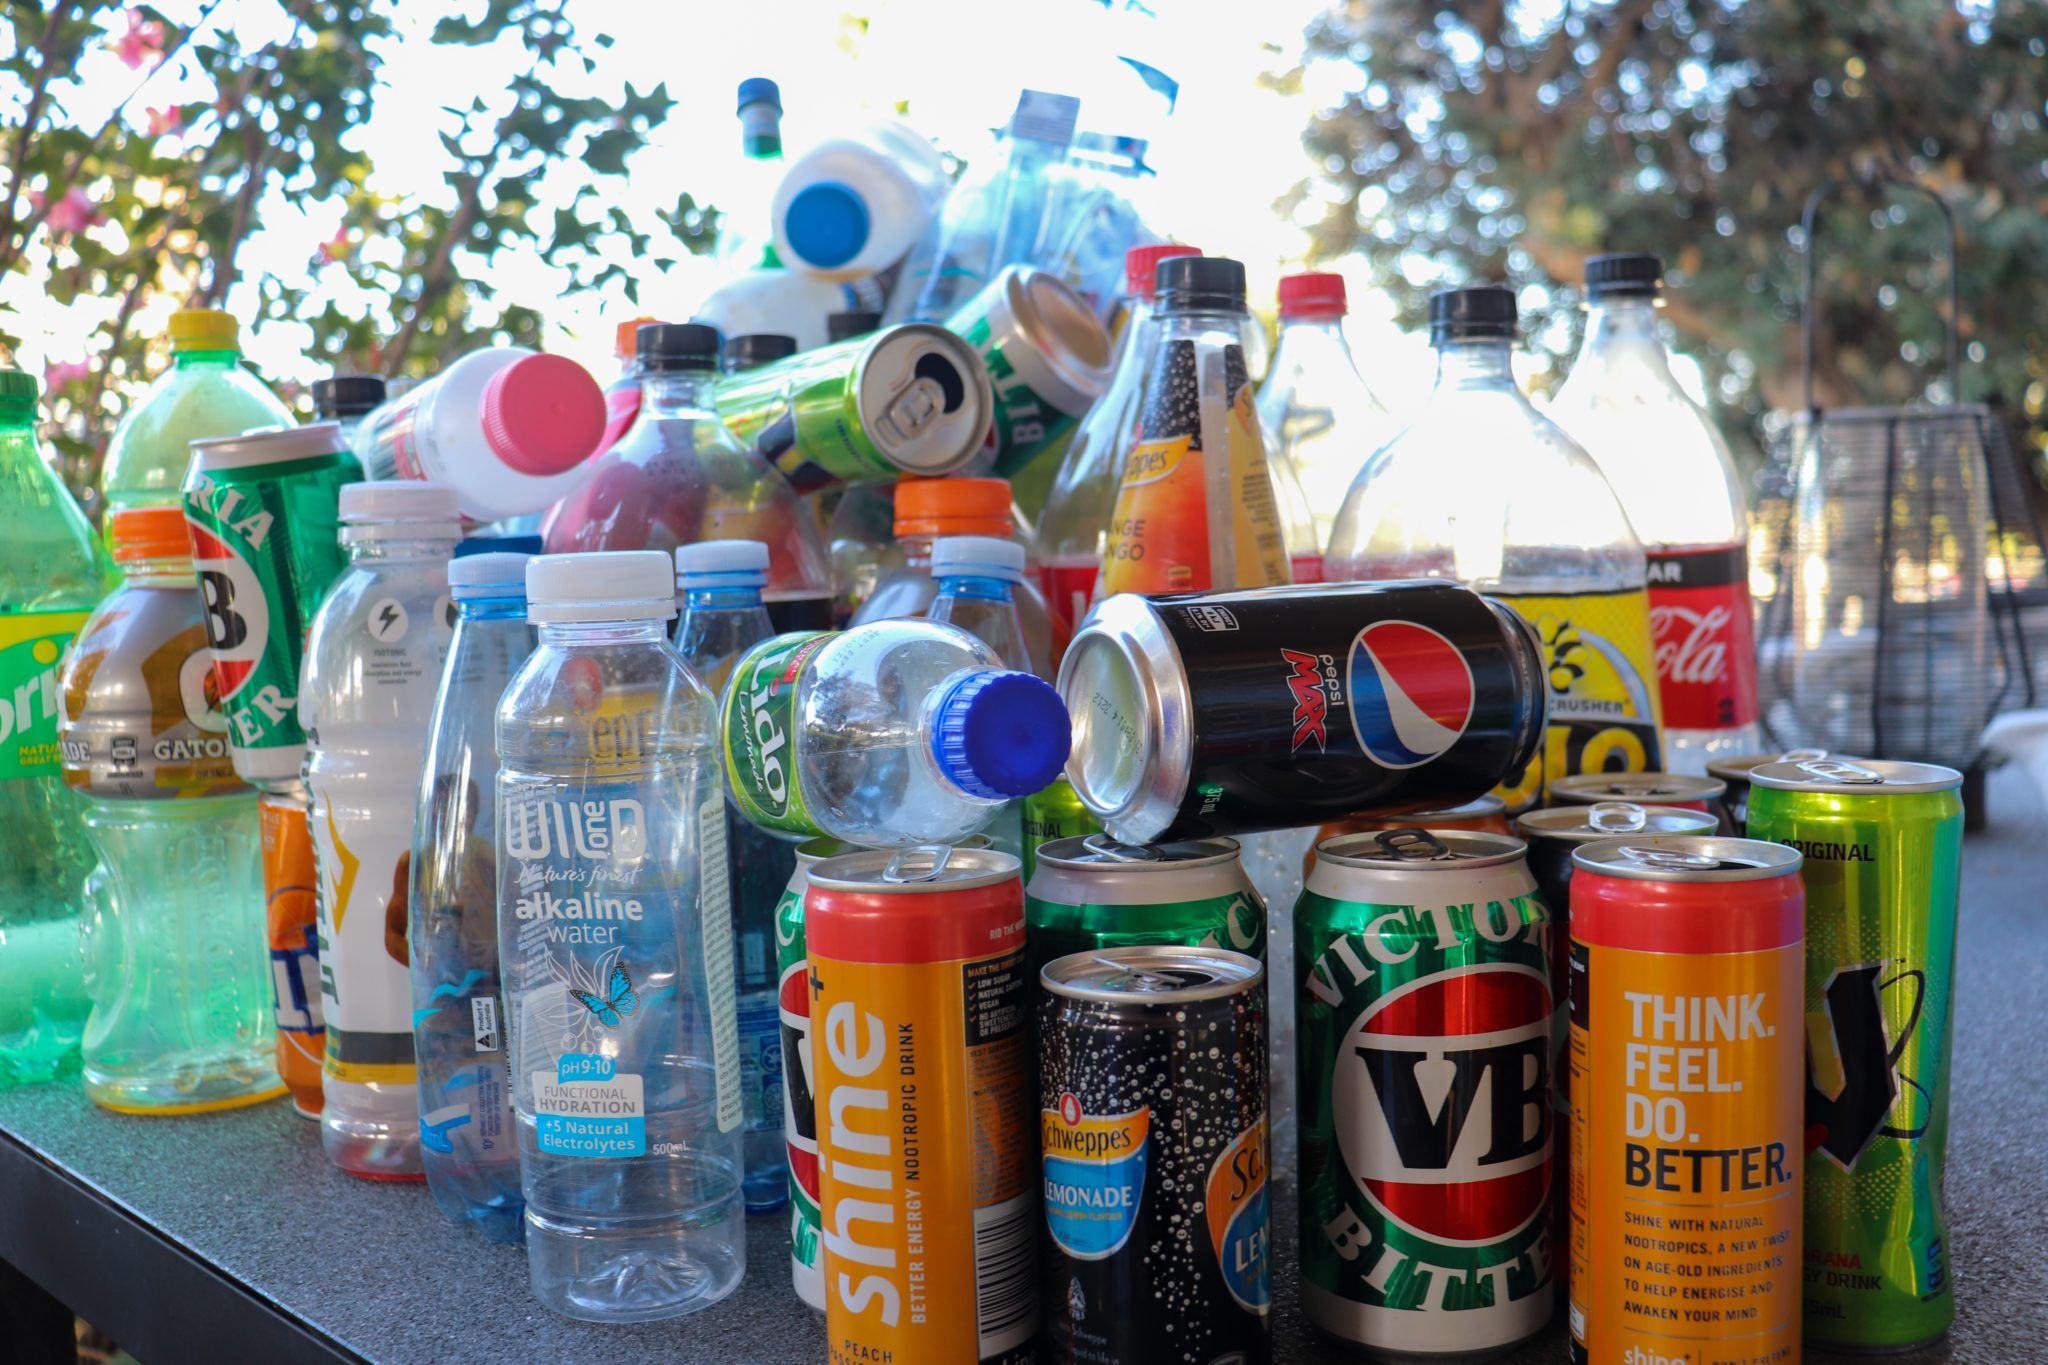 array of used cans and plastic bottles